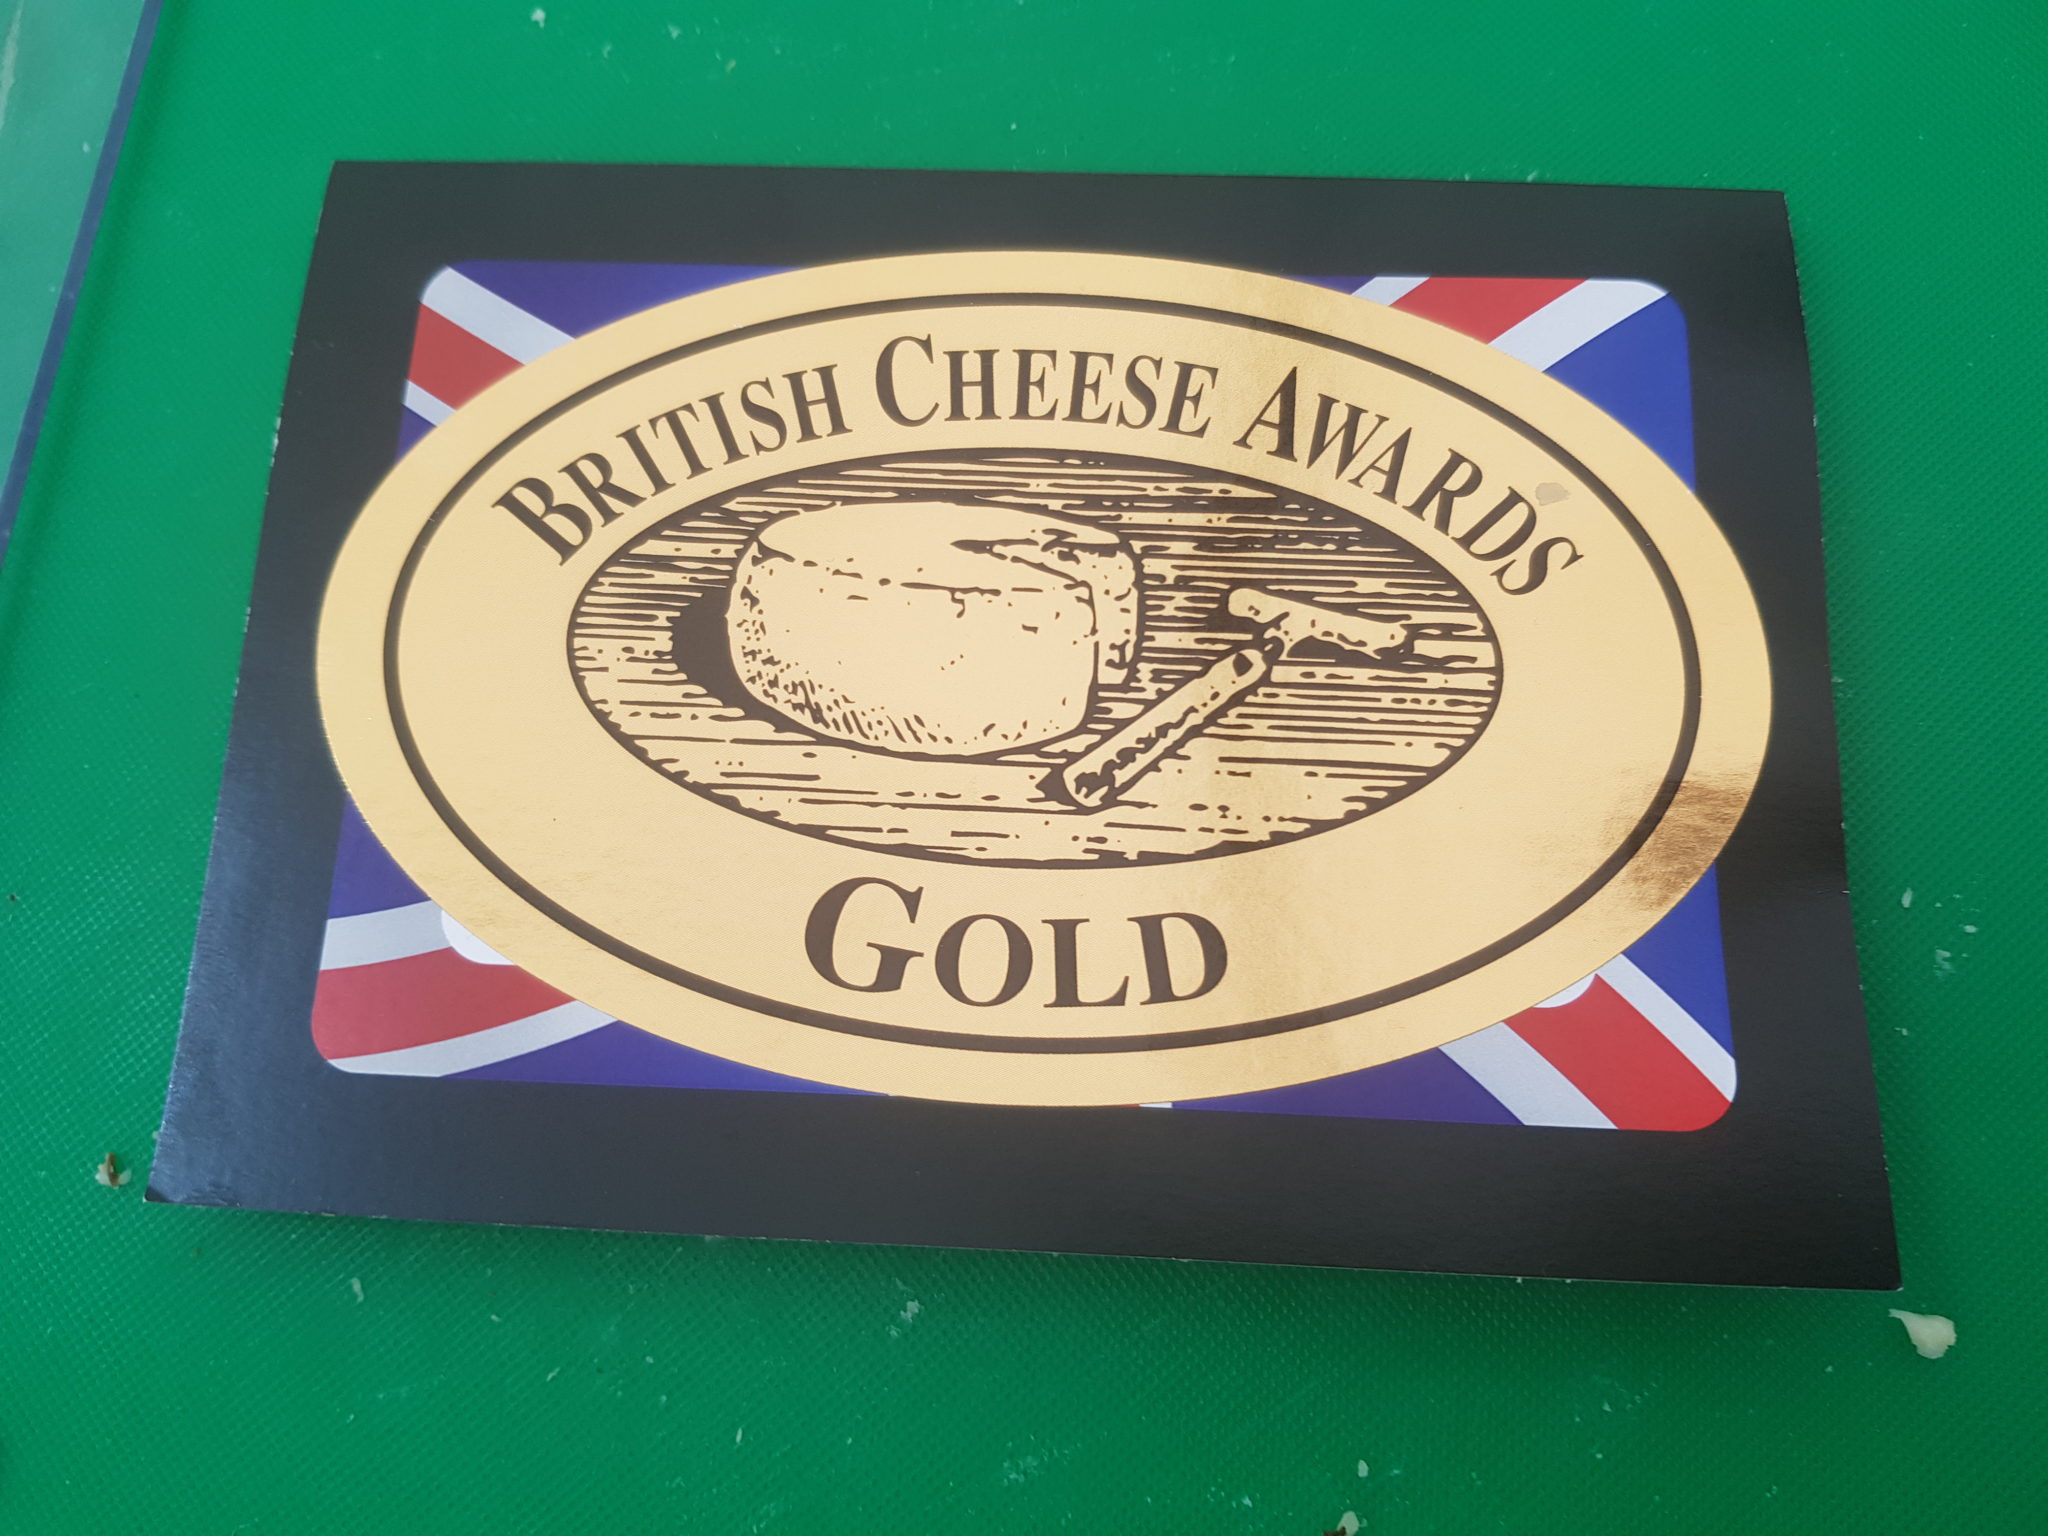 Gold for Gould's mature cheddar